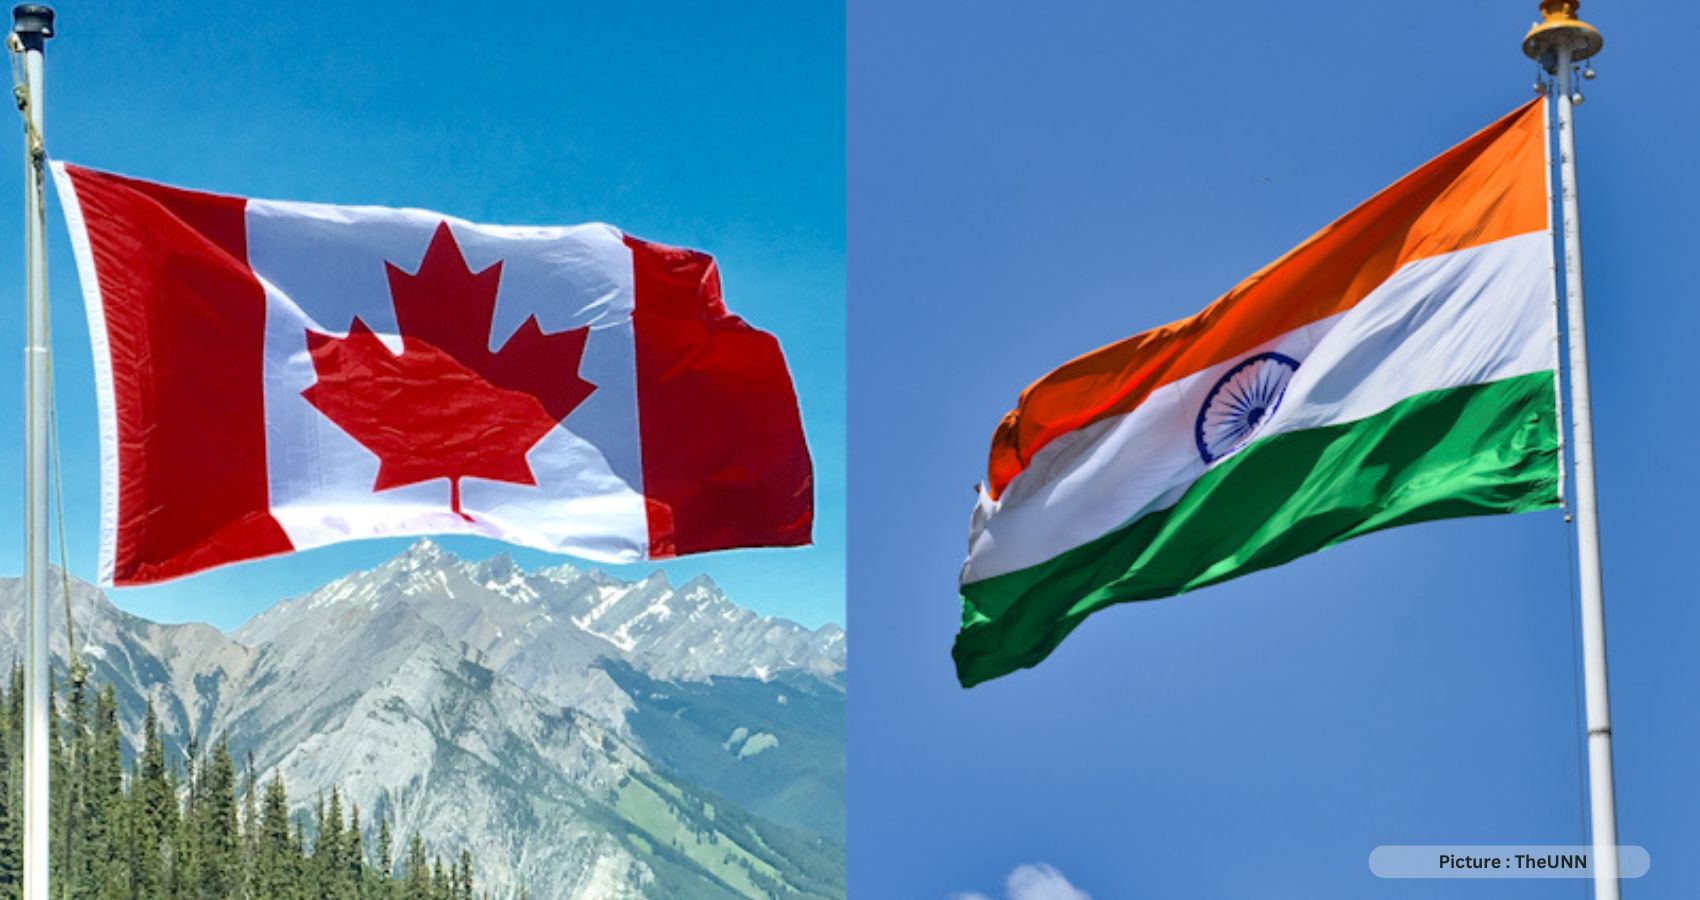 India stops new visas for Canadians, asks Ottawa to downsize missions as spat worsens